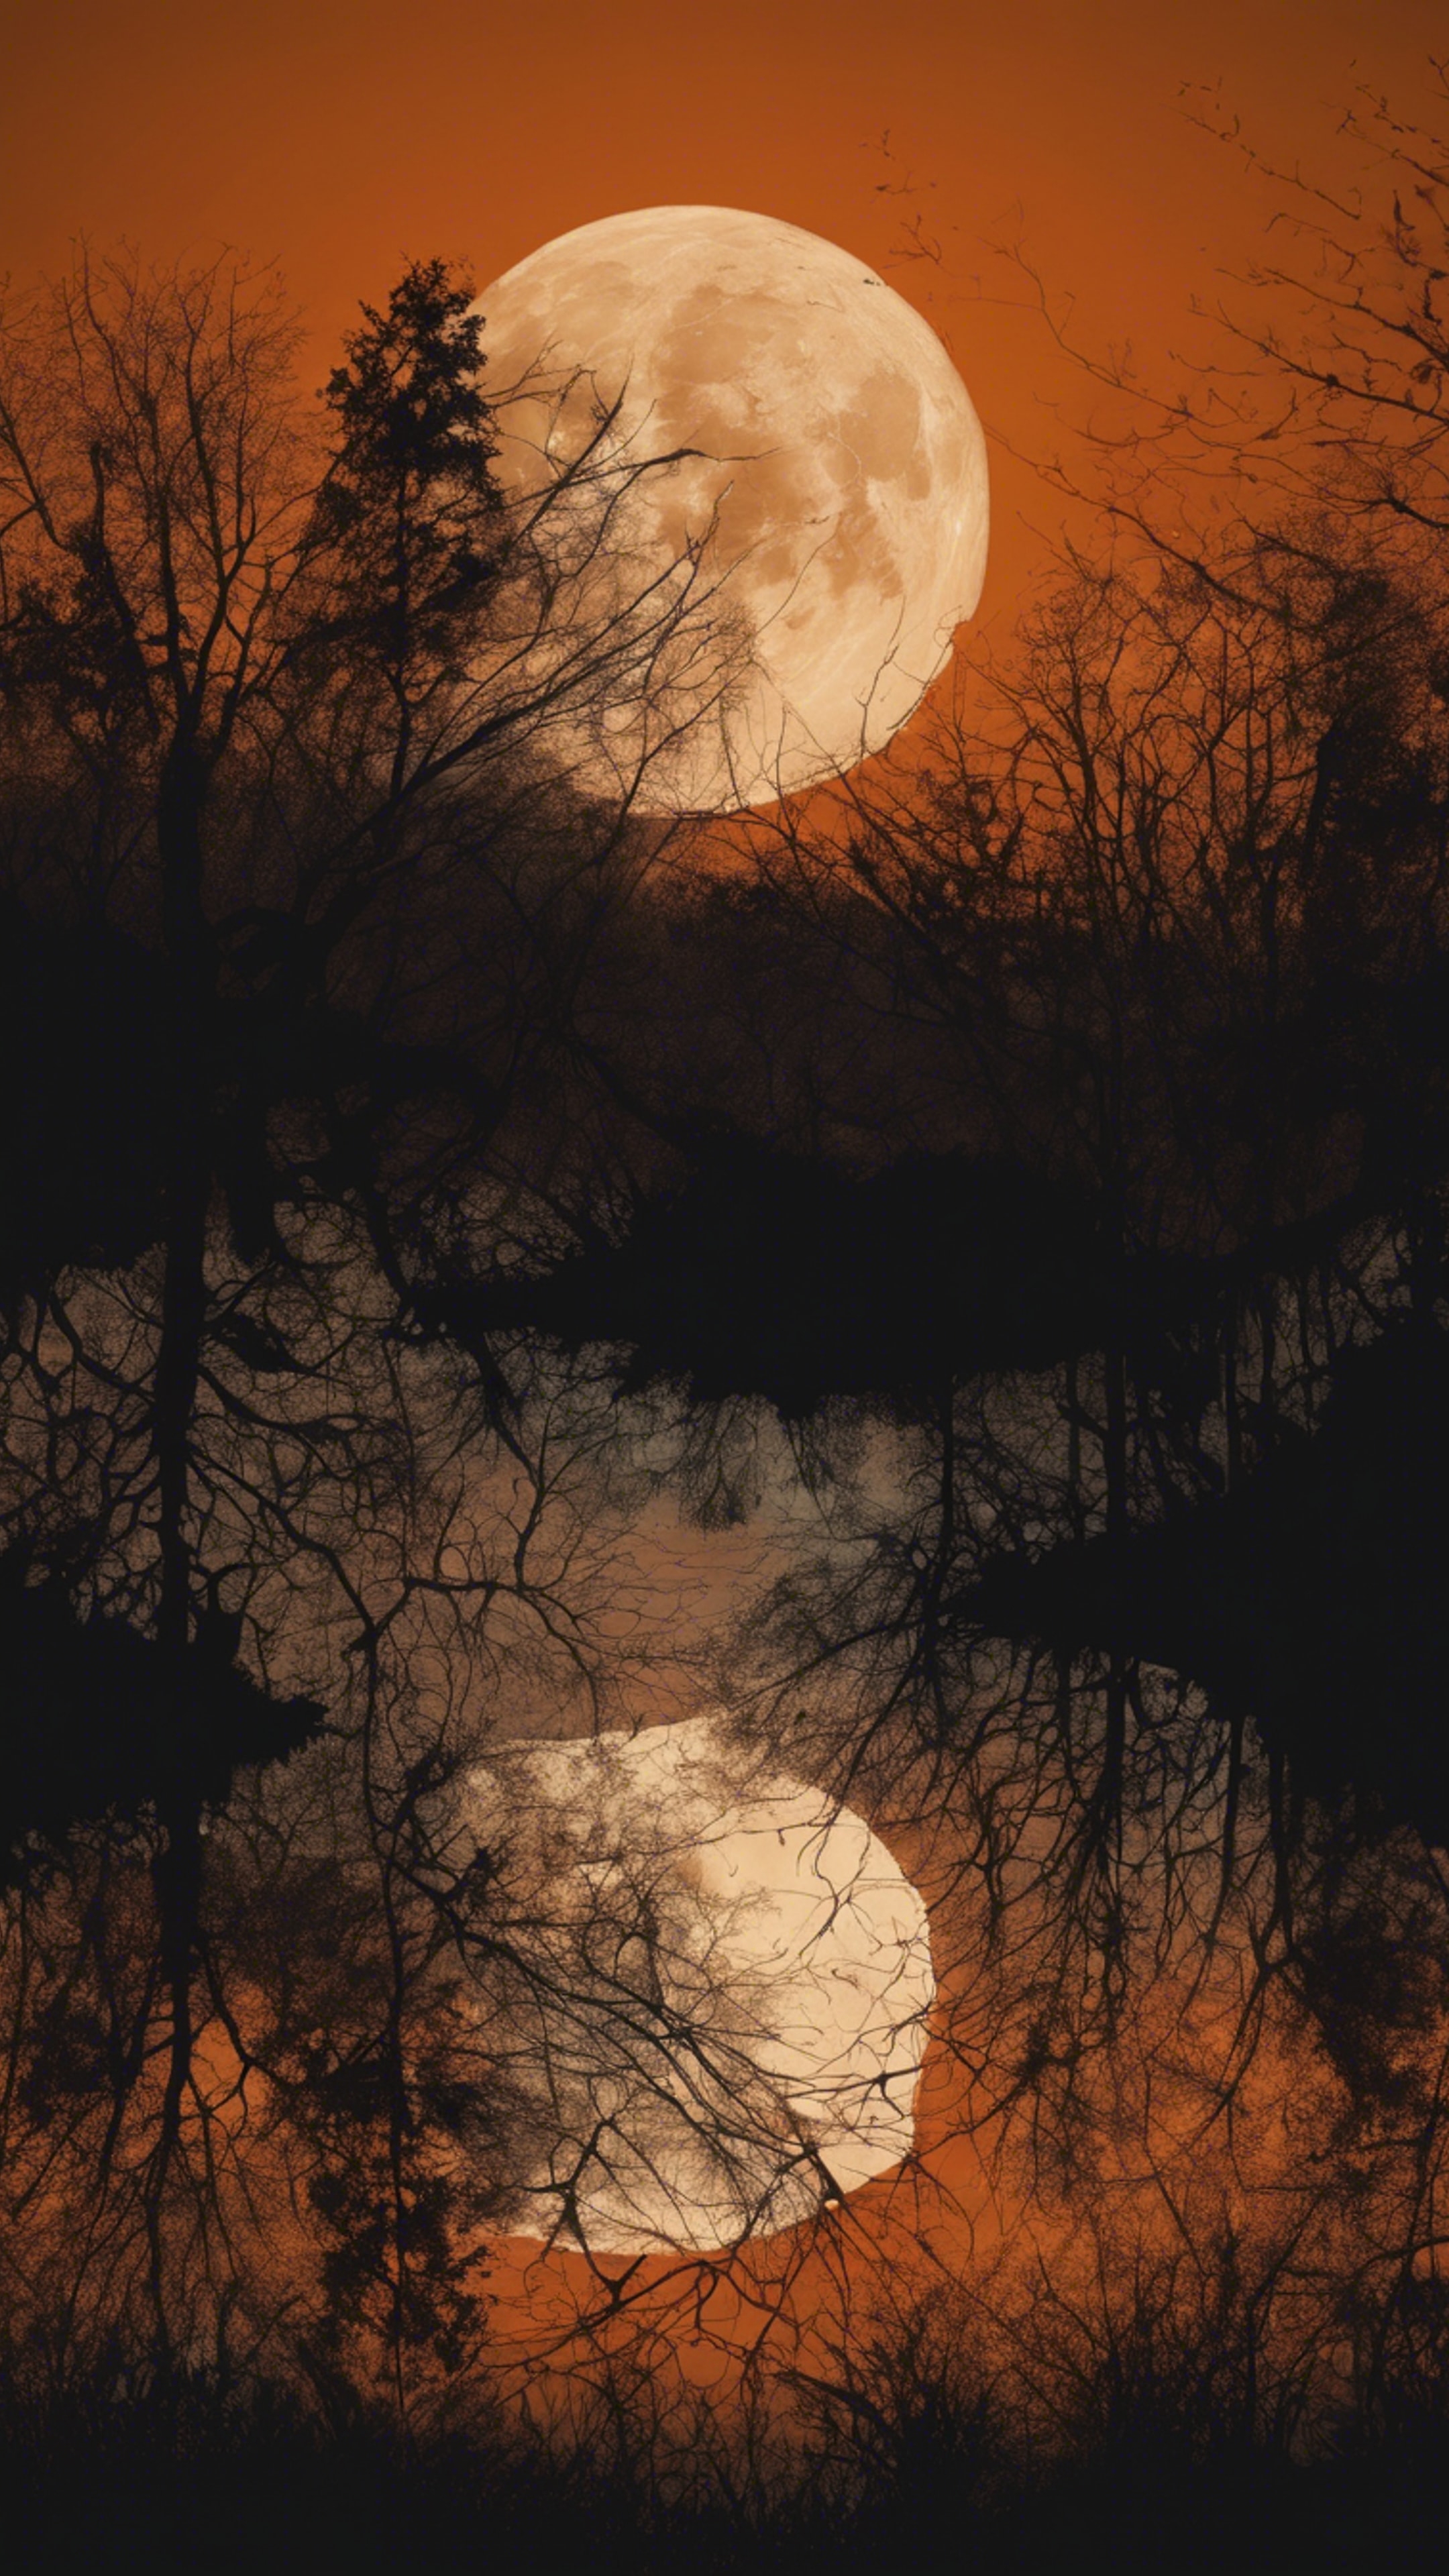 Gleaming full moon over black silhouetted forest contrasted by a deep orange sky. Tapéta[d3ef8041818348d2b22b]